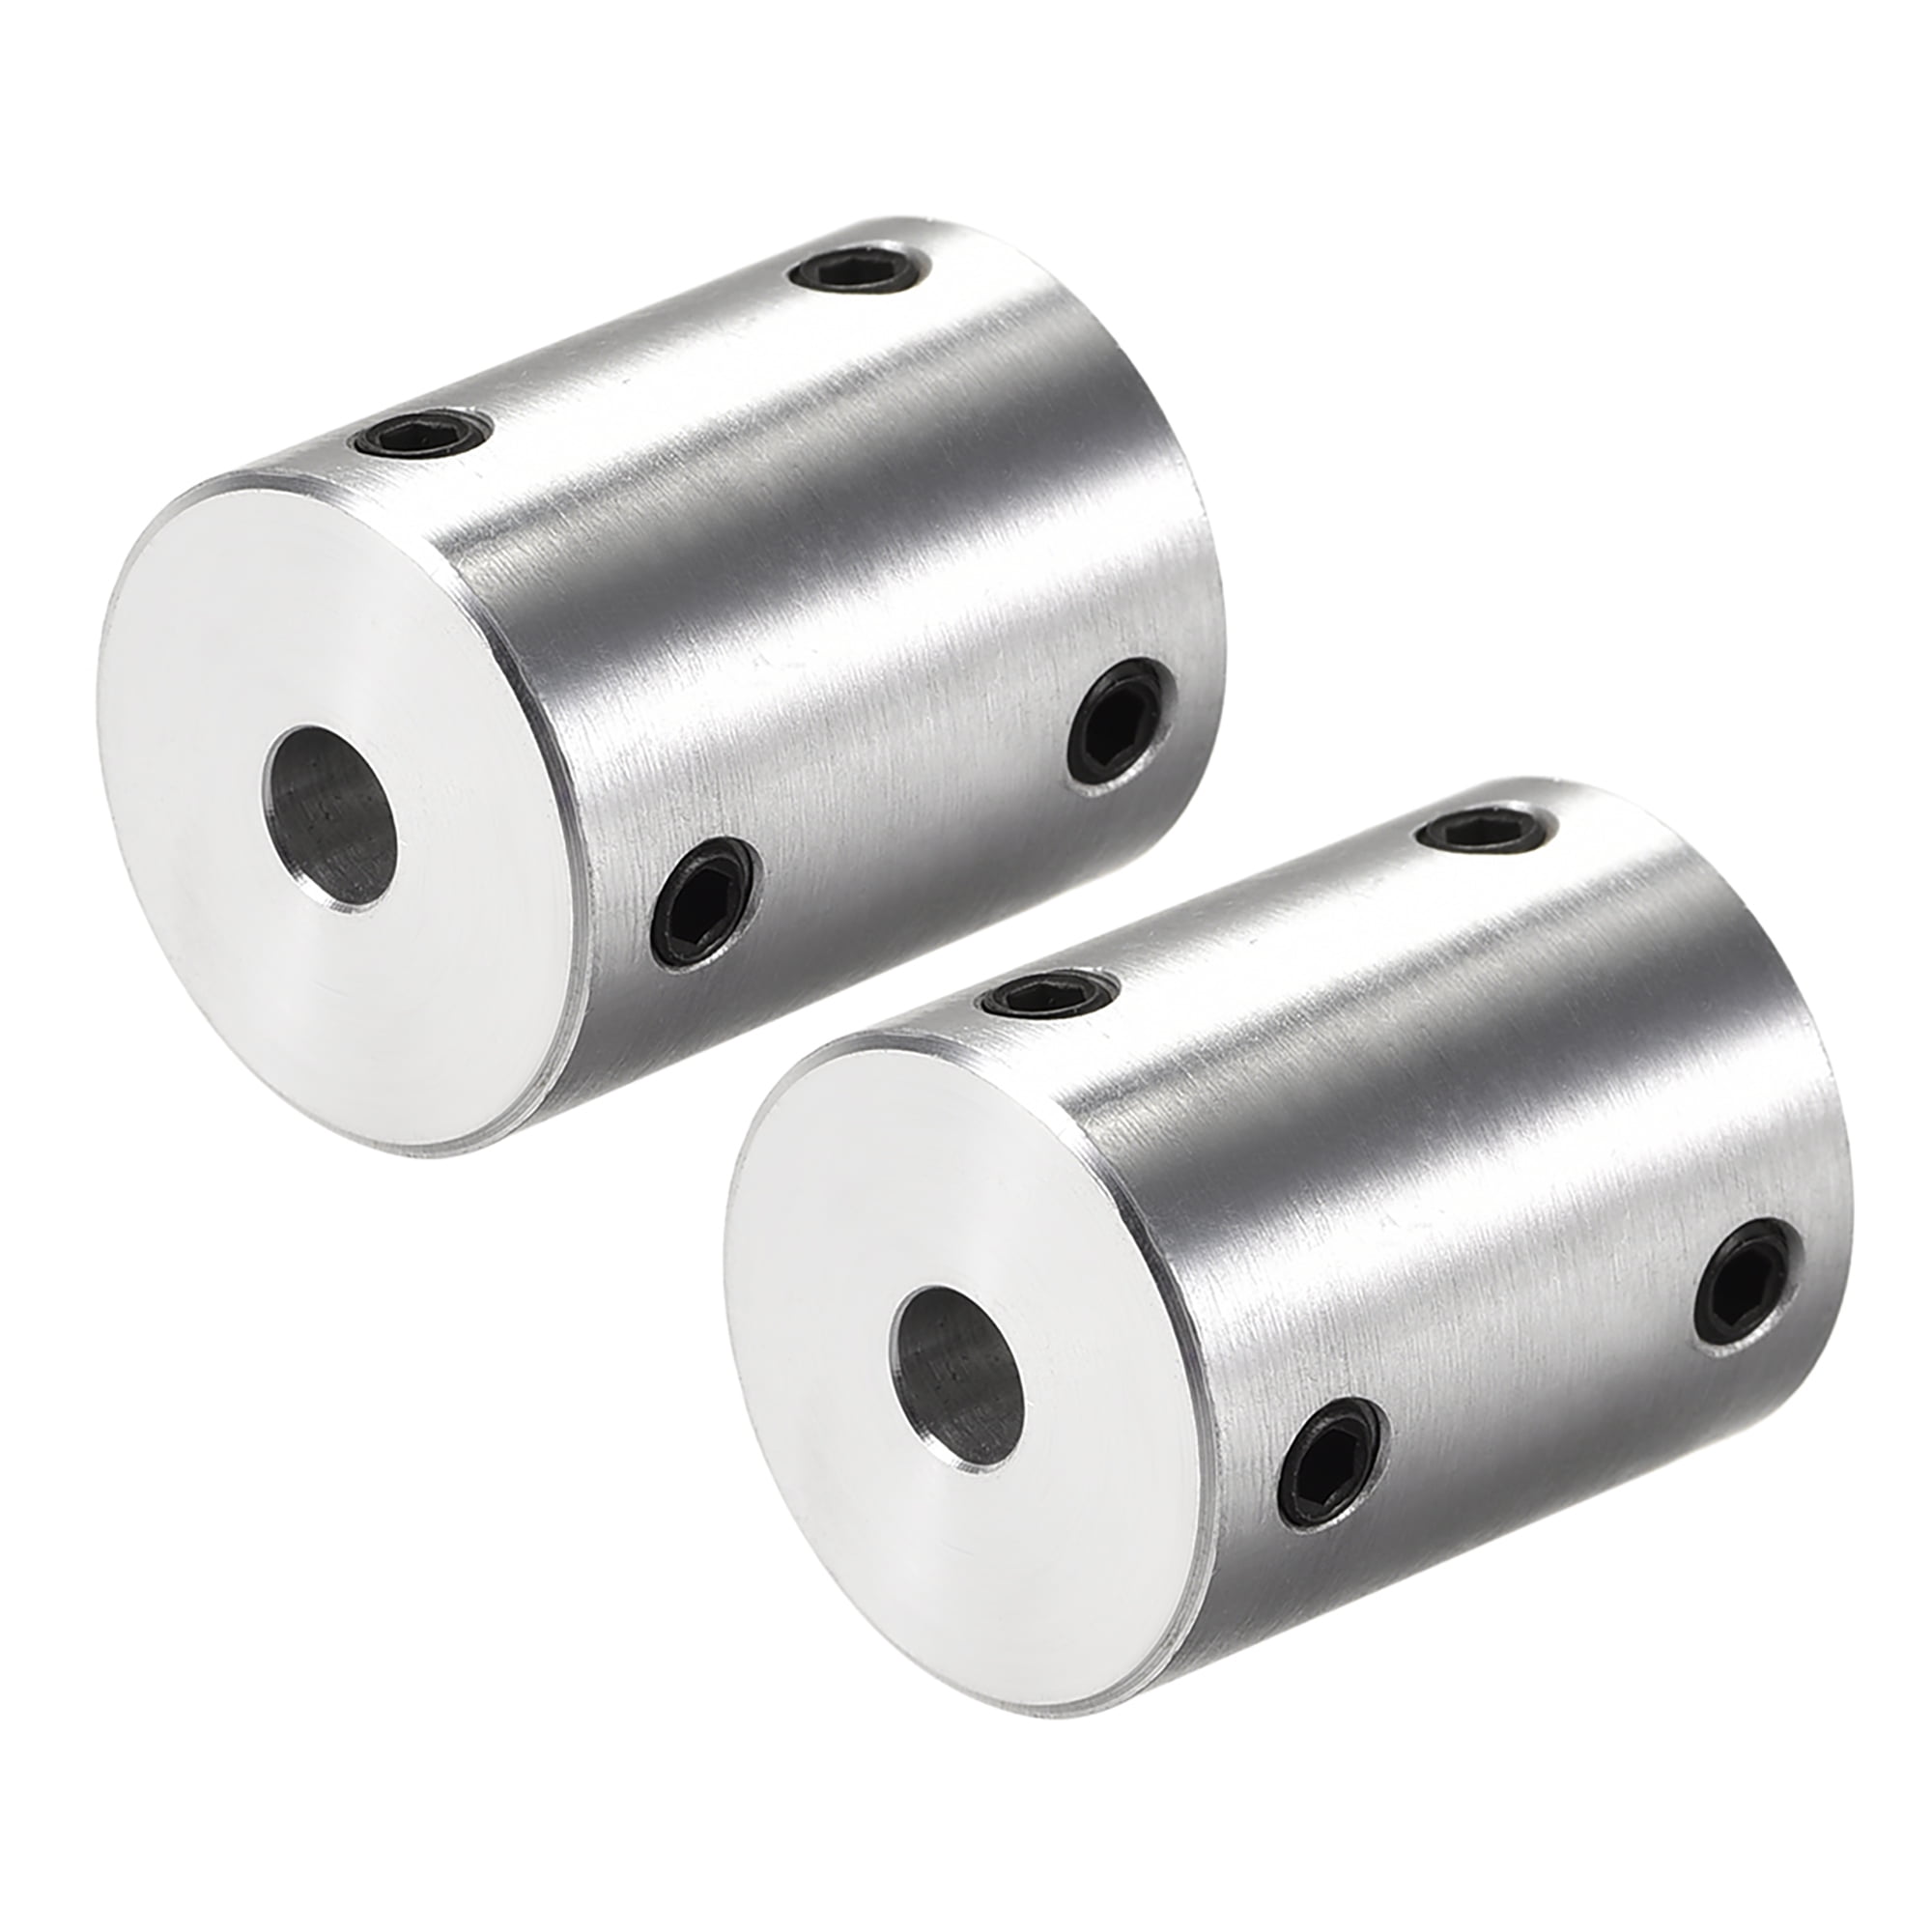 3-4-6-8mm Aluminum Alloy Rigid Coupling Gear Motor Connector Coupling  Fittings